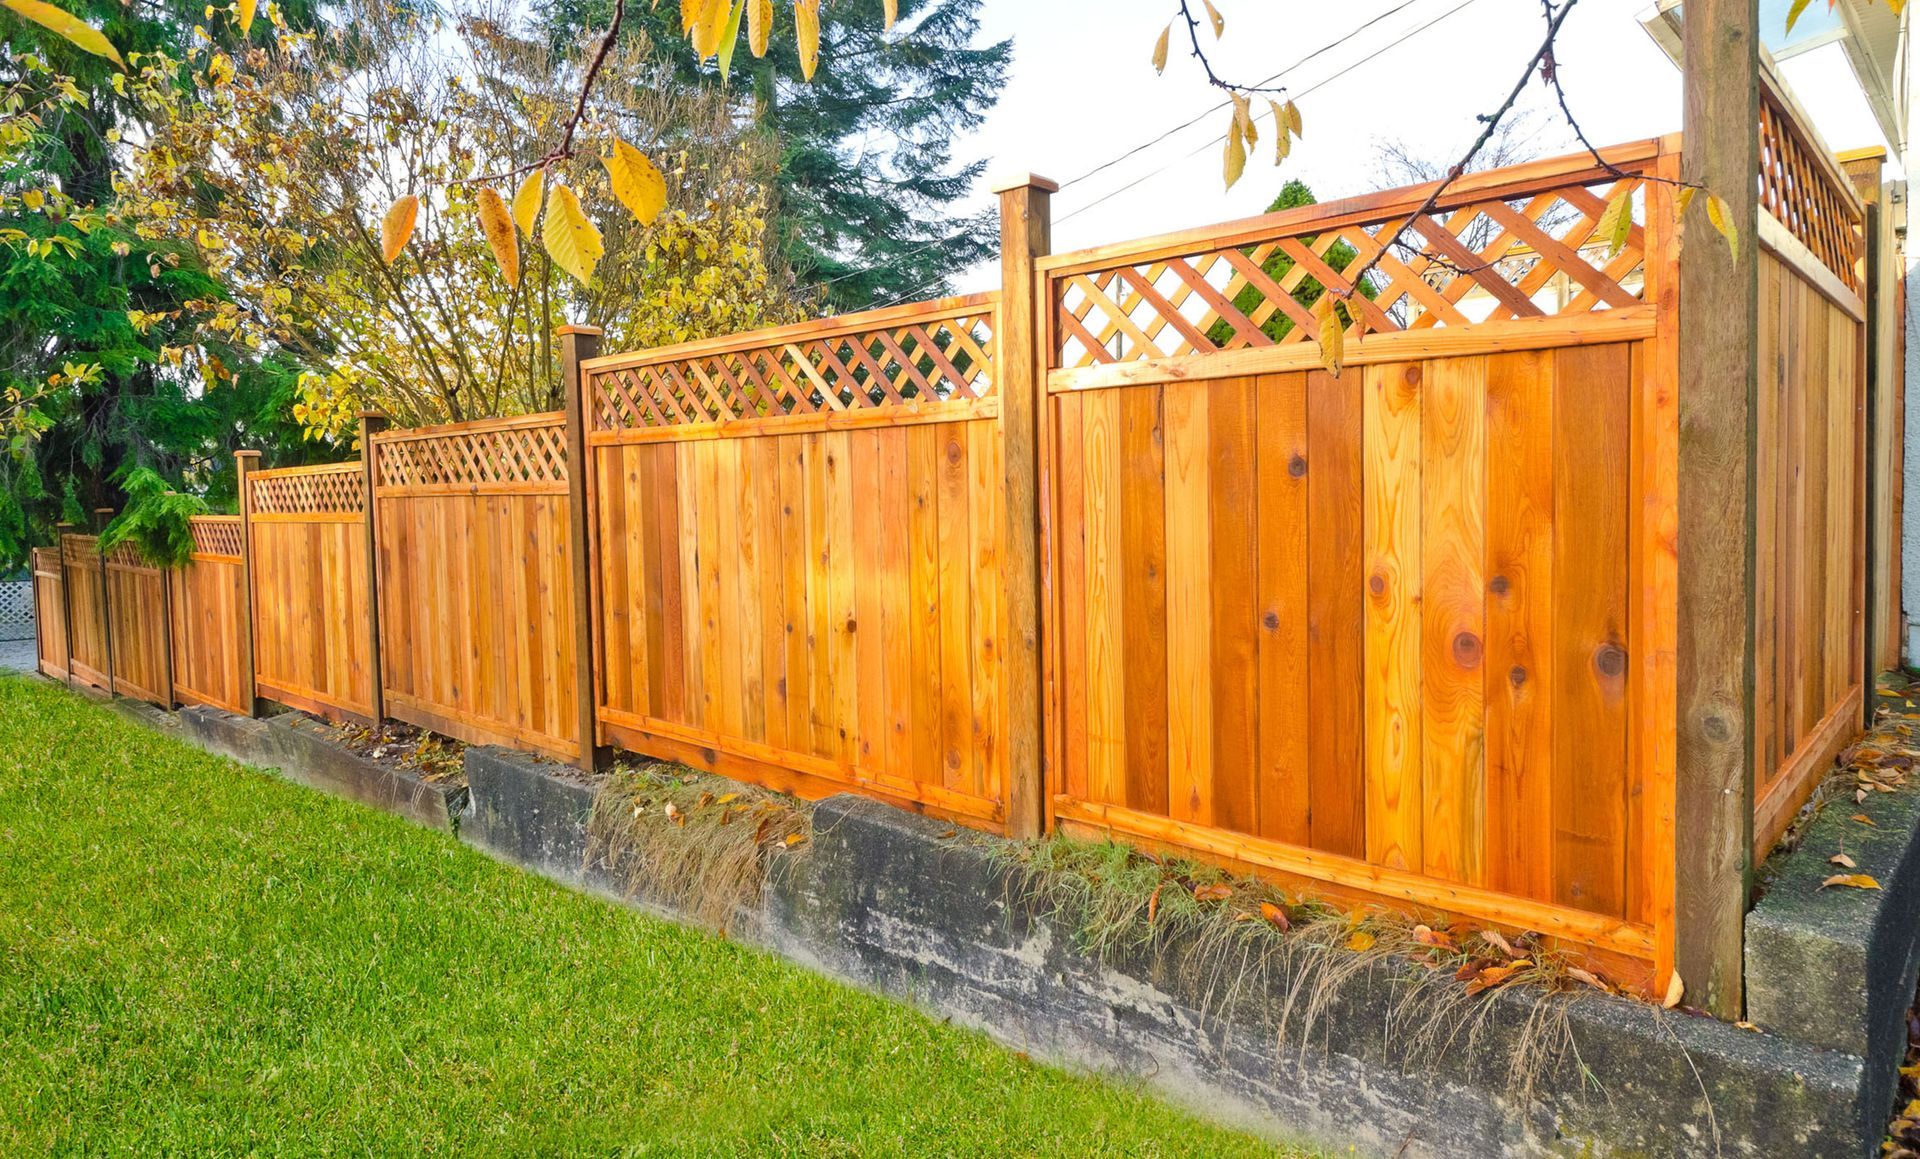 Fence Installations and Repairs Flores Fence Chicago, IL